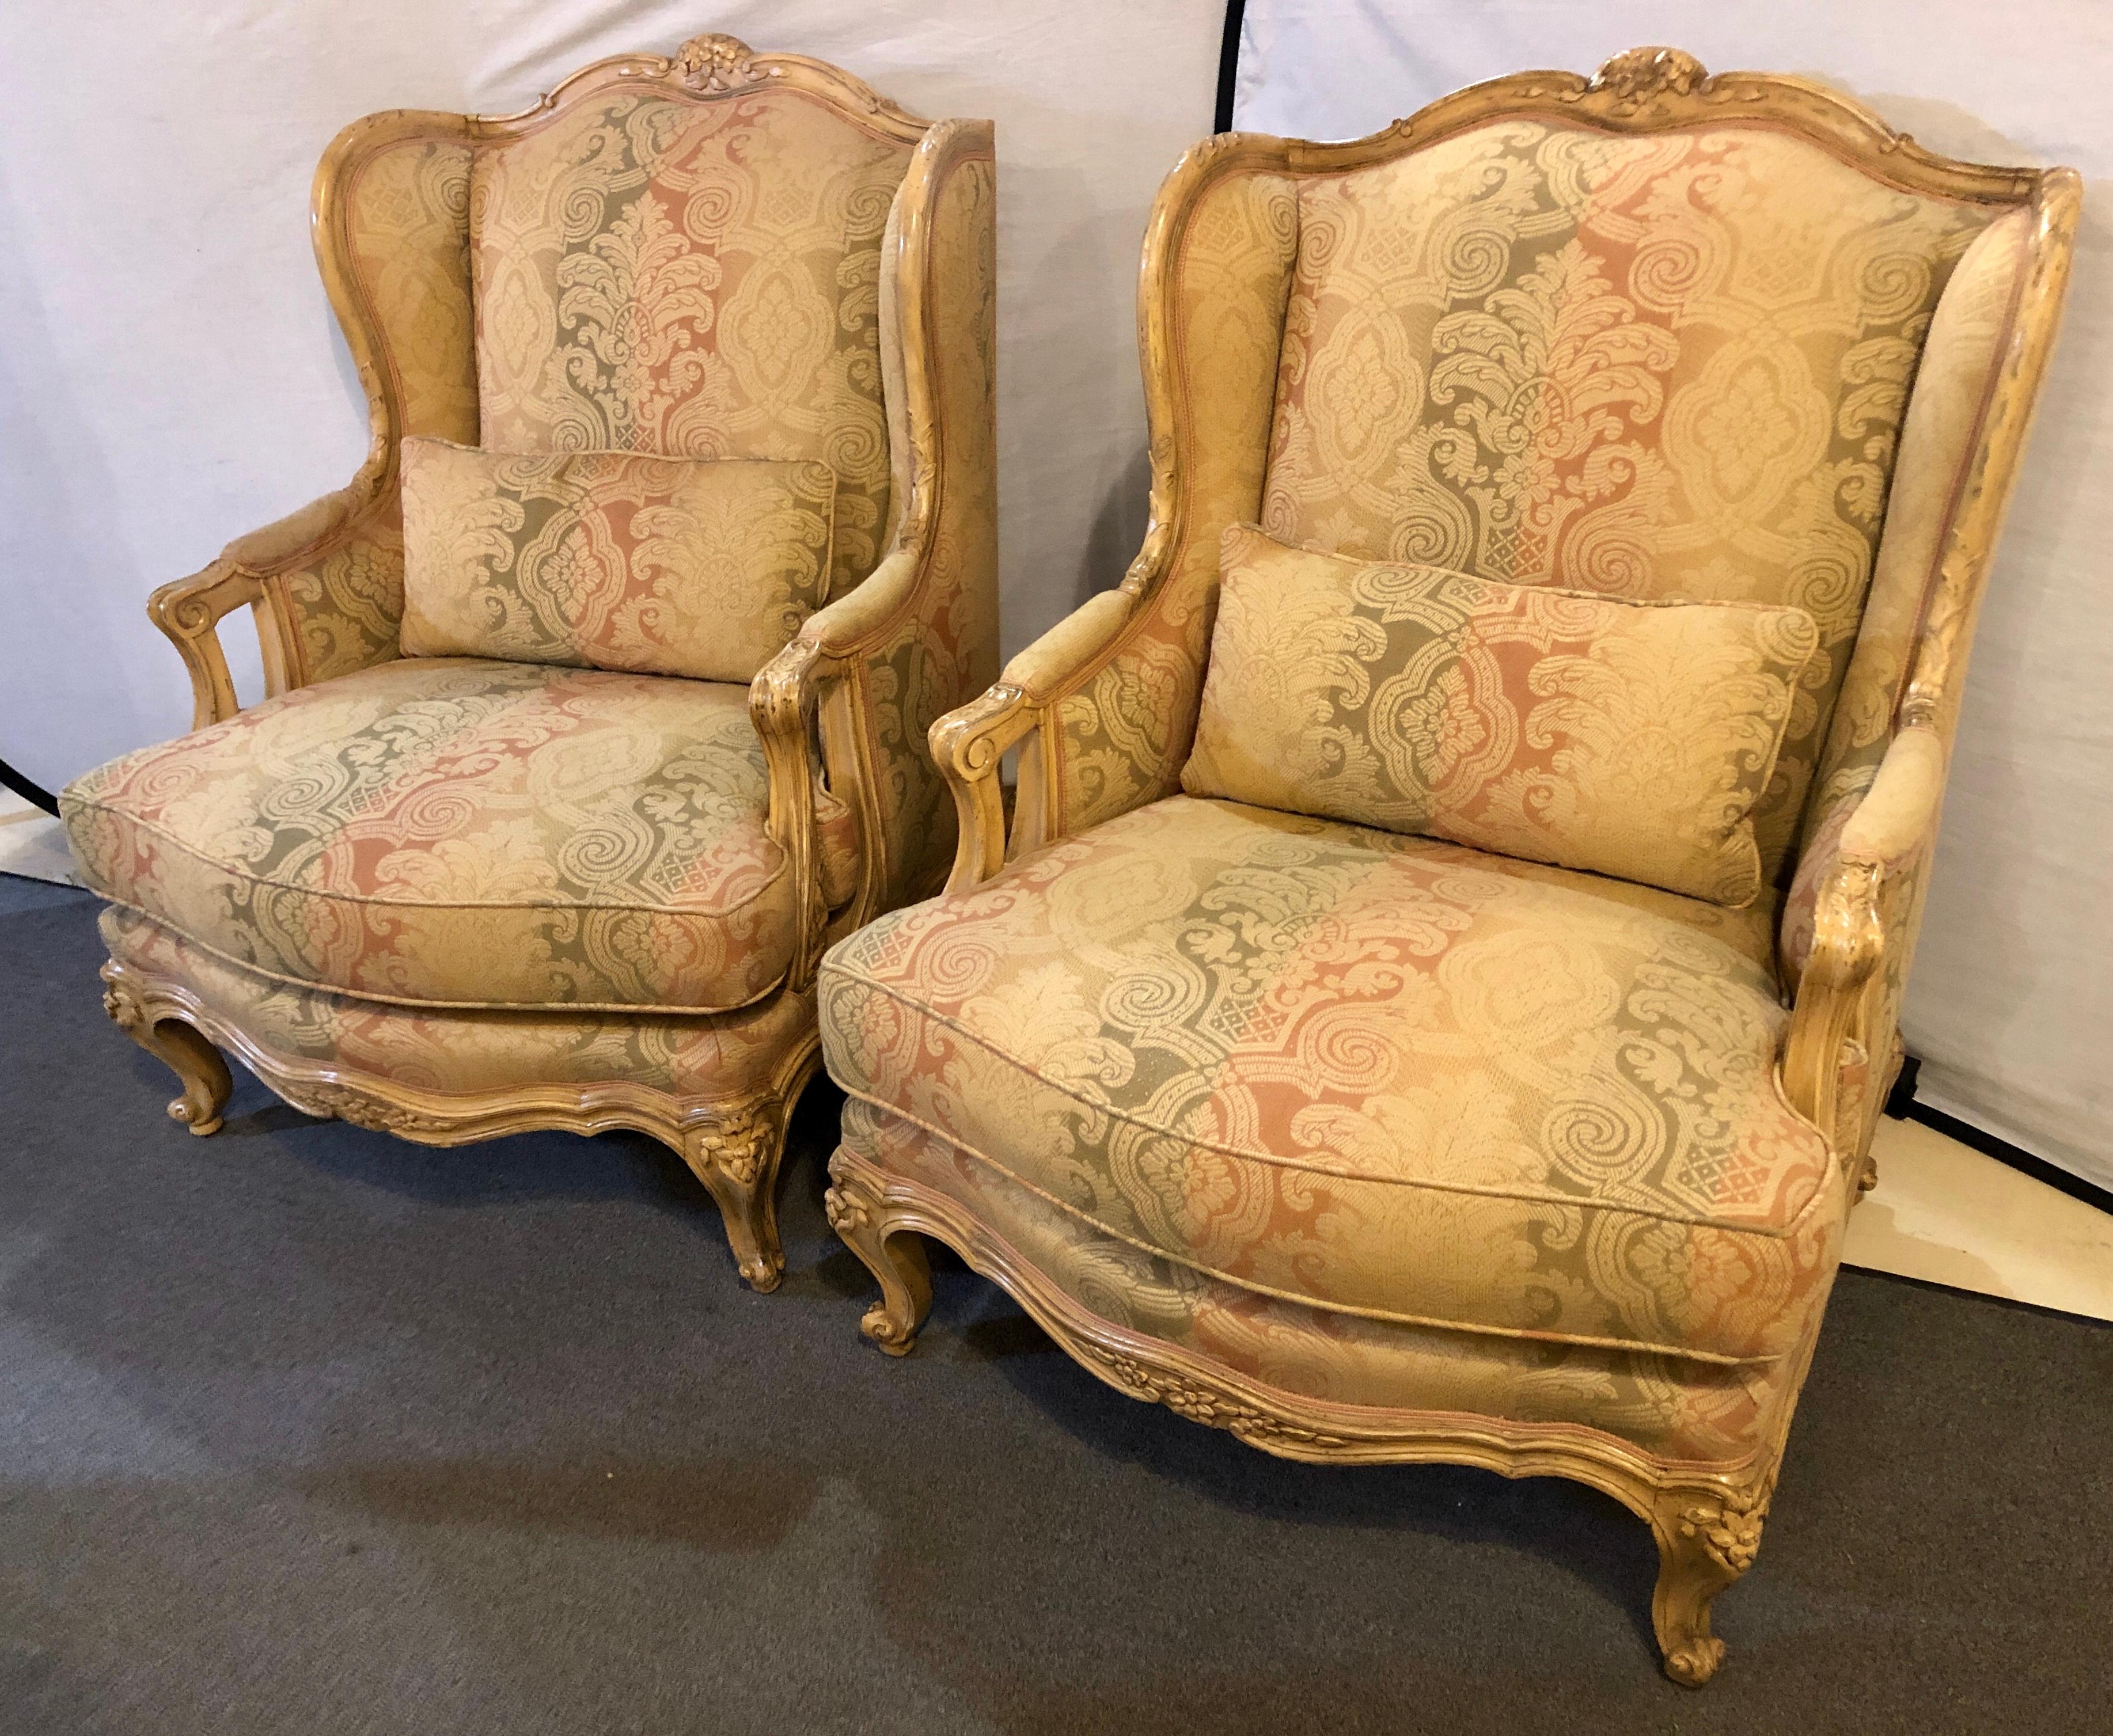 Pair of palatial Louis XV style wingback chairs. This fine pair of large and impressive distressed wingback or bergere chairs are finely carved with roses, leafs and vines on painted stylish strong and sturdy frames. The pair in a stunning stripped